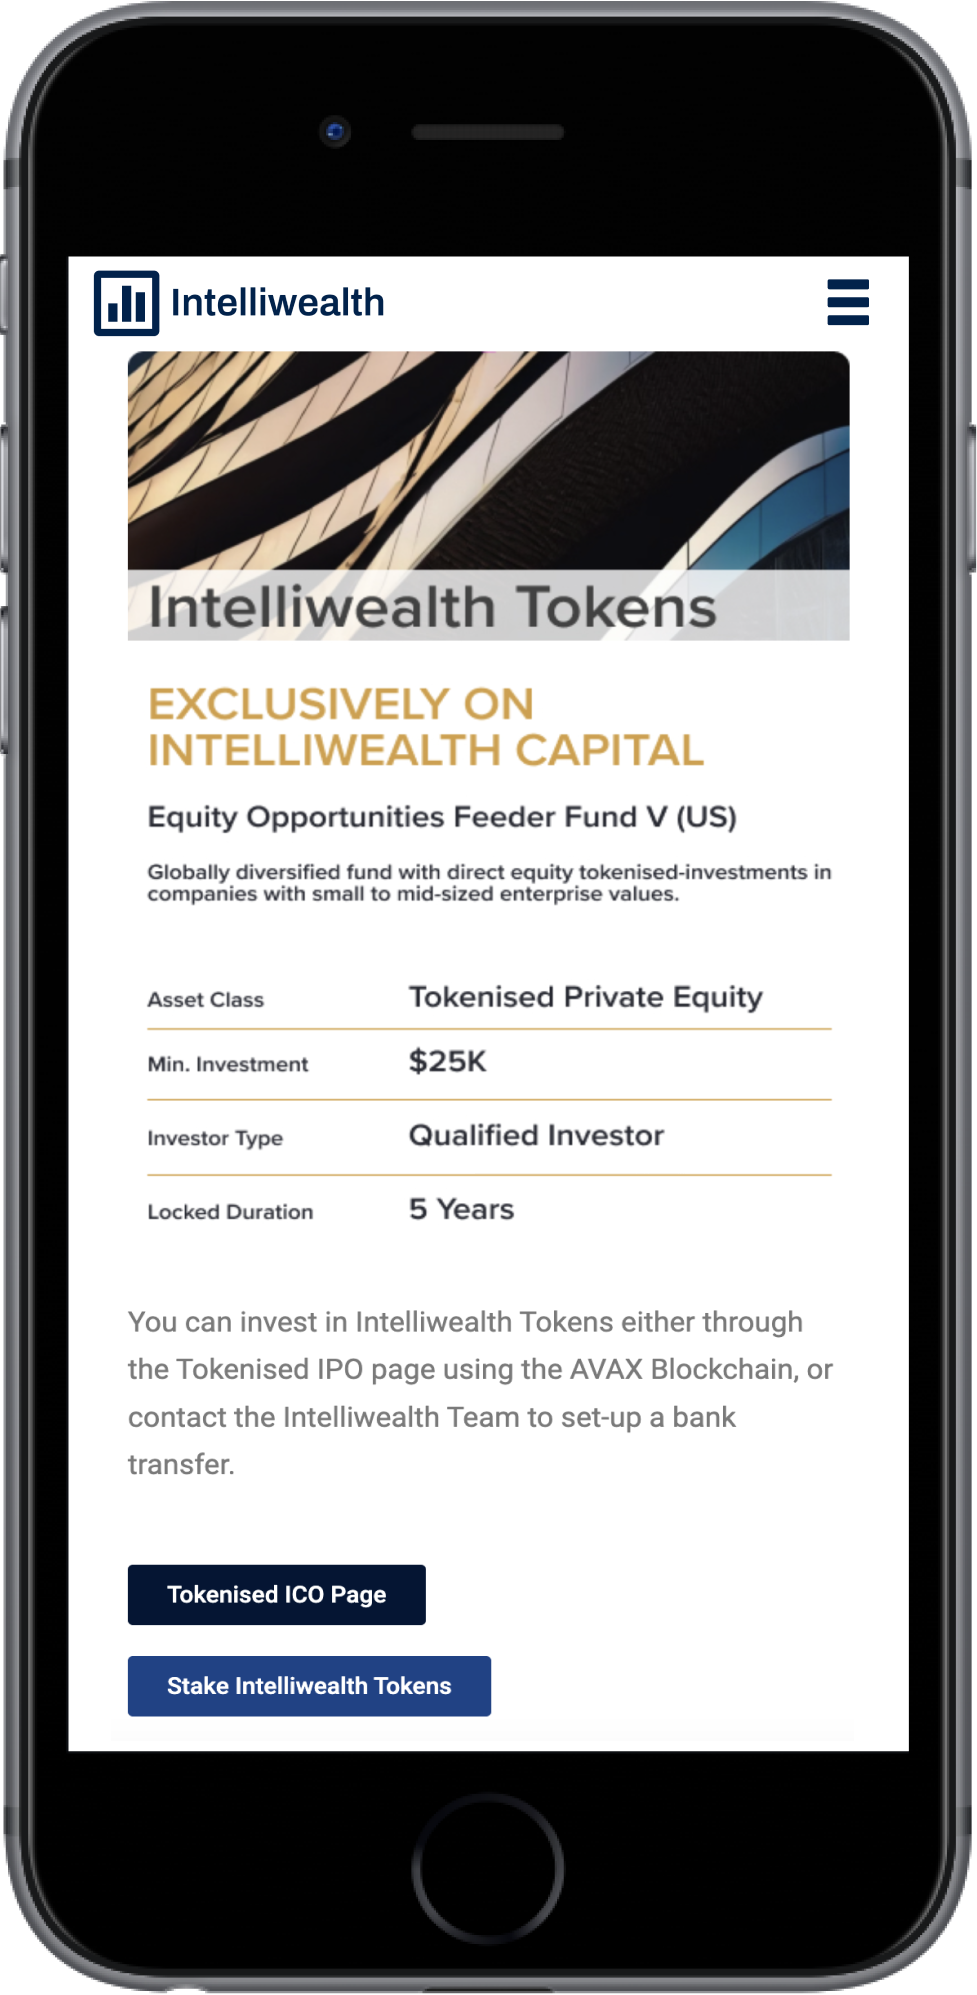 Mobile-web-app-Intelliwealth-Investment-details-page